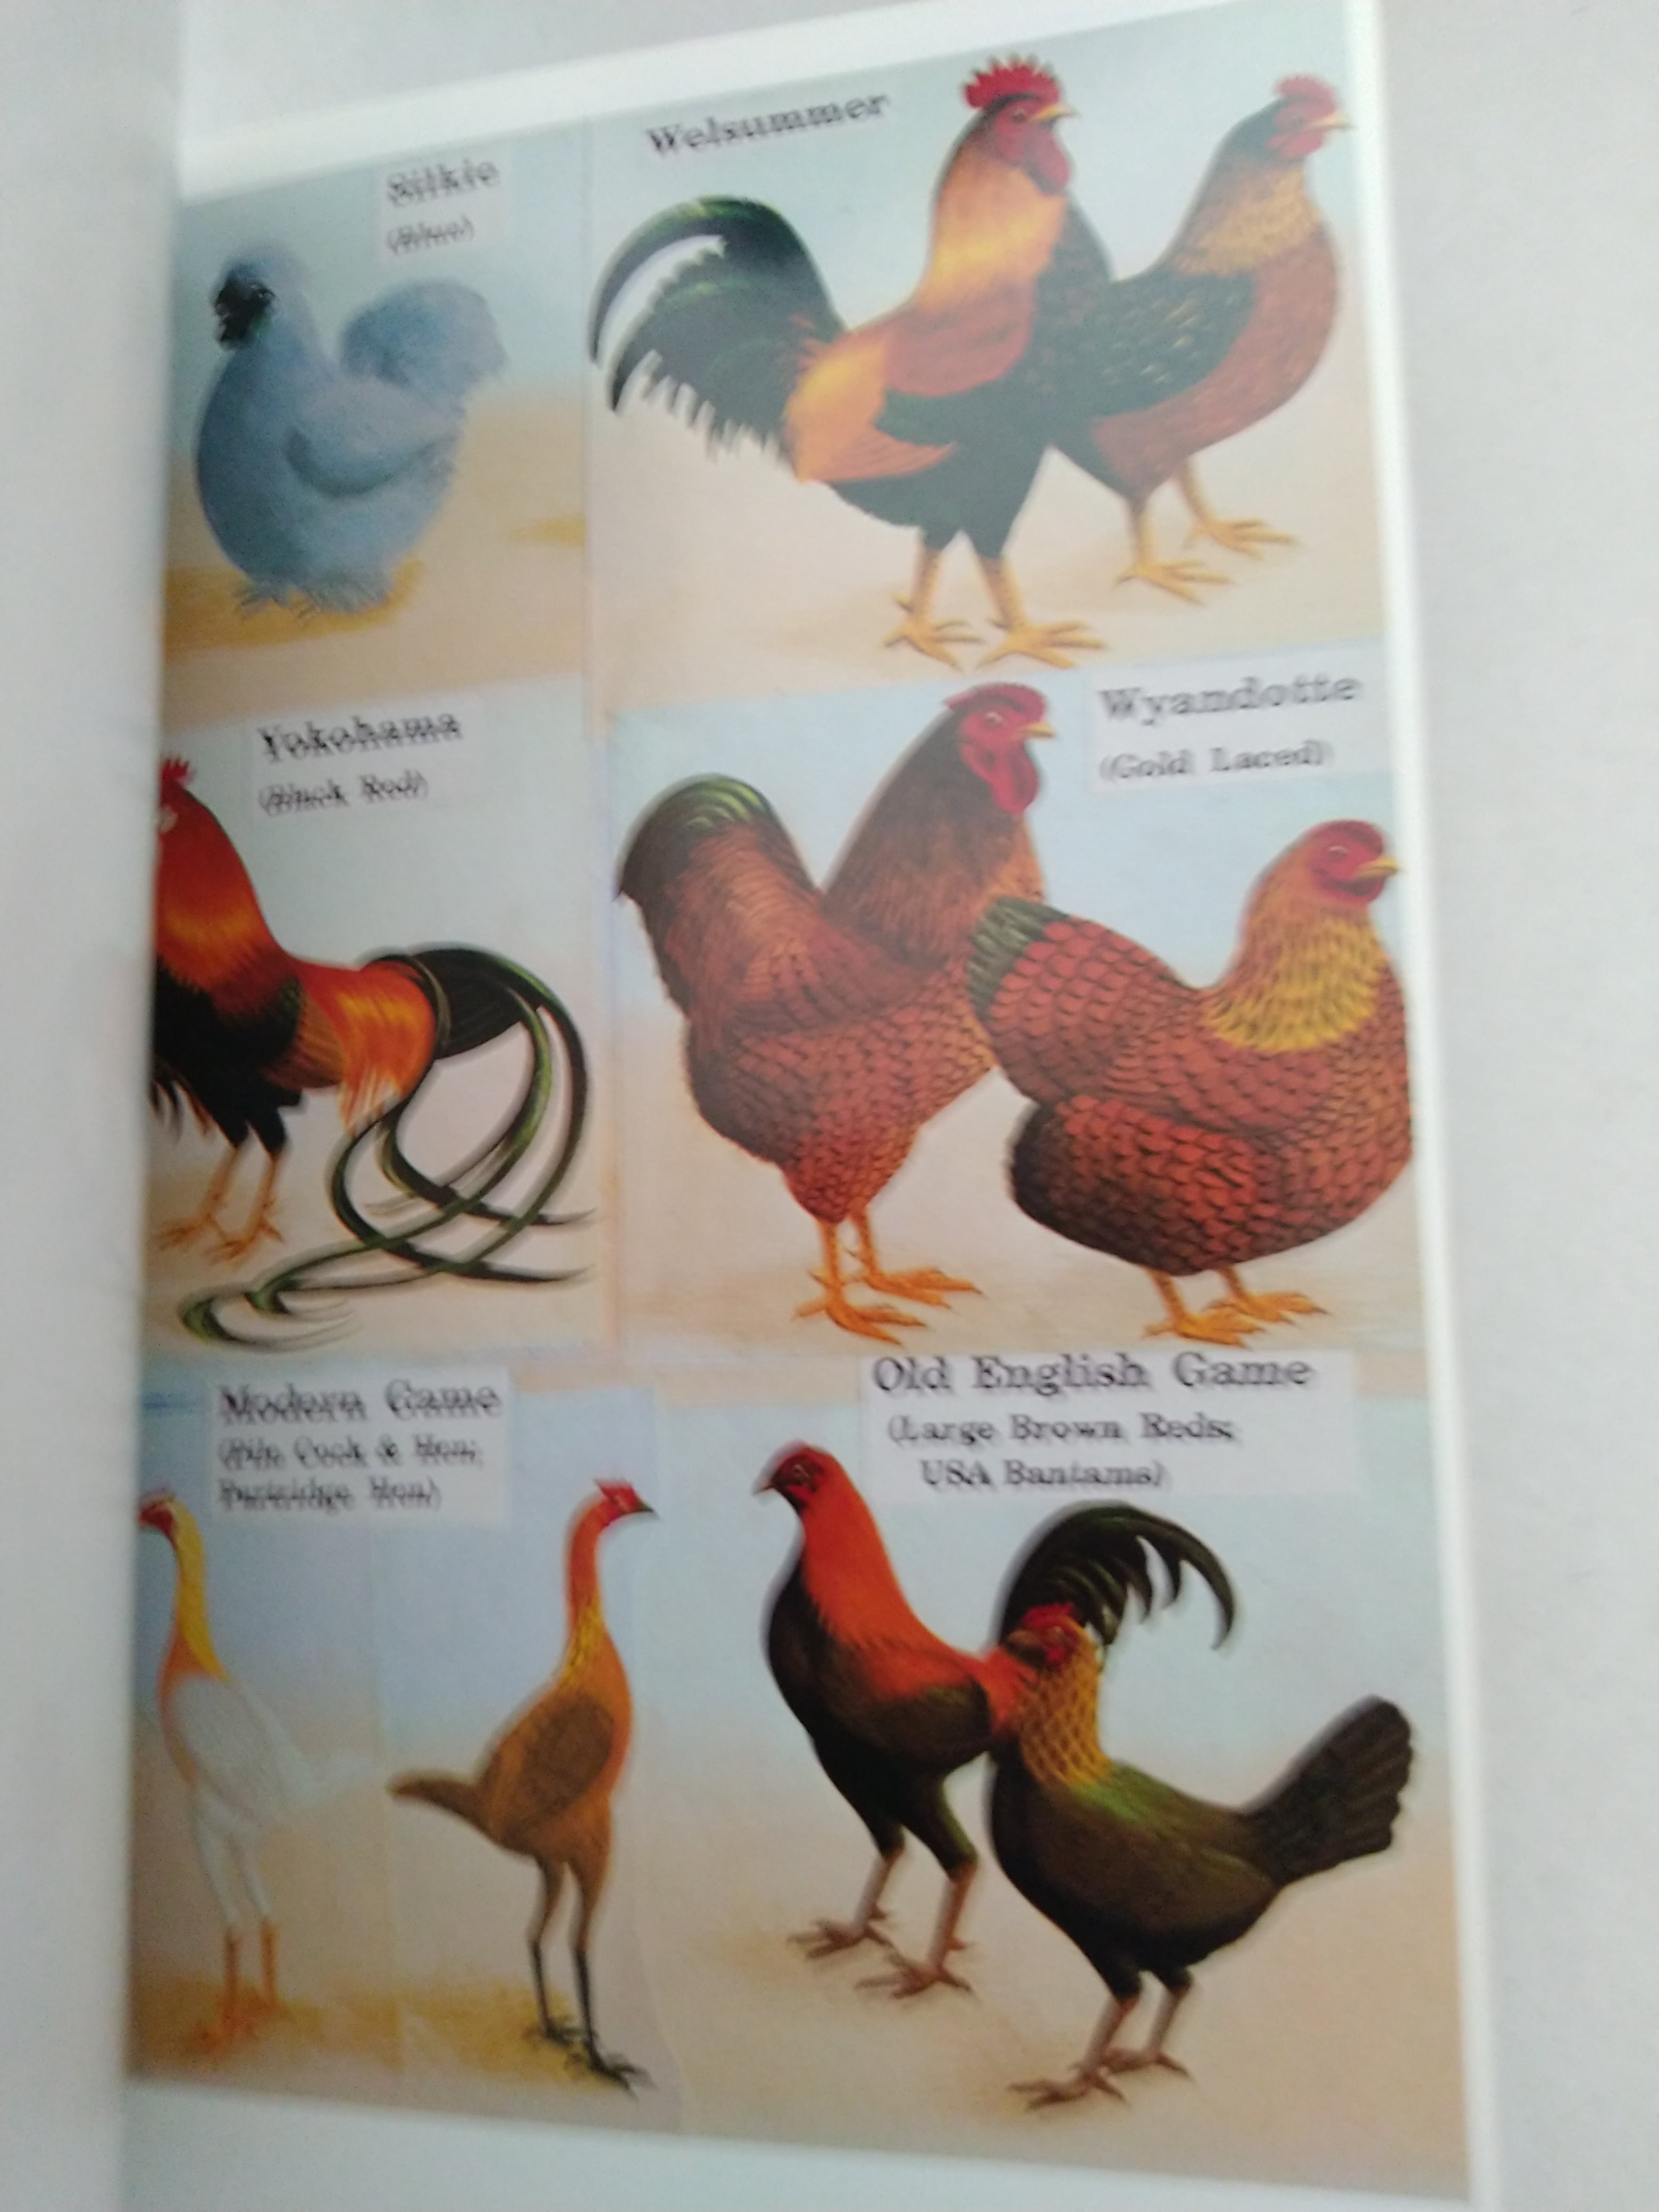 A Concise Poultry Colour Guide (International Poultry Library) by Dr. Joseph Batty